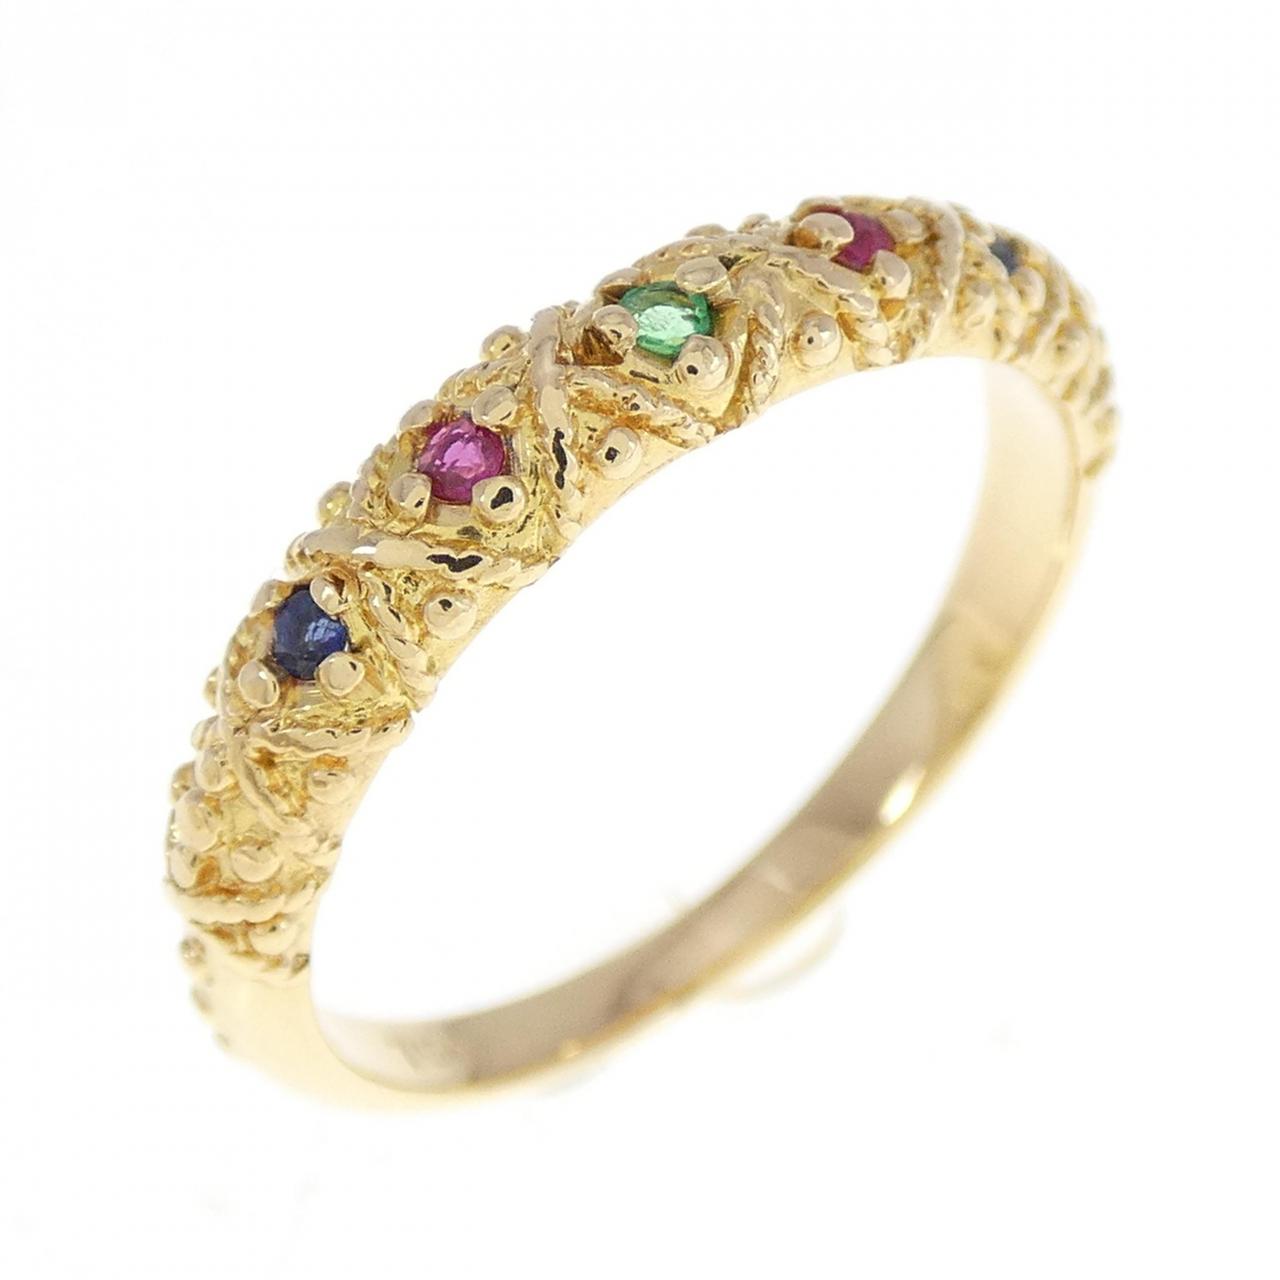 750YG colored stone ring